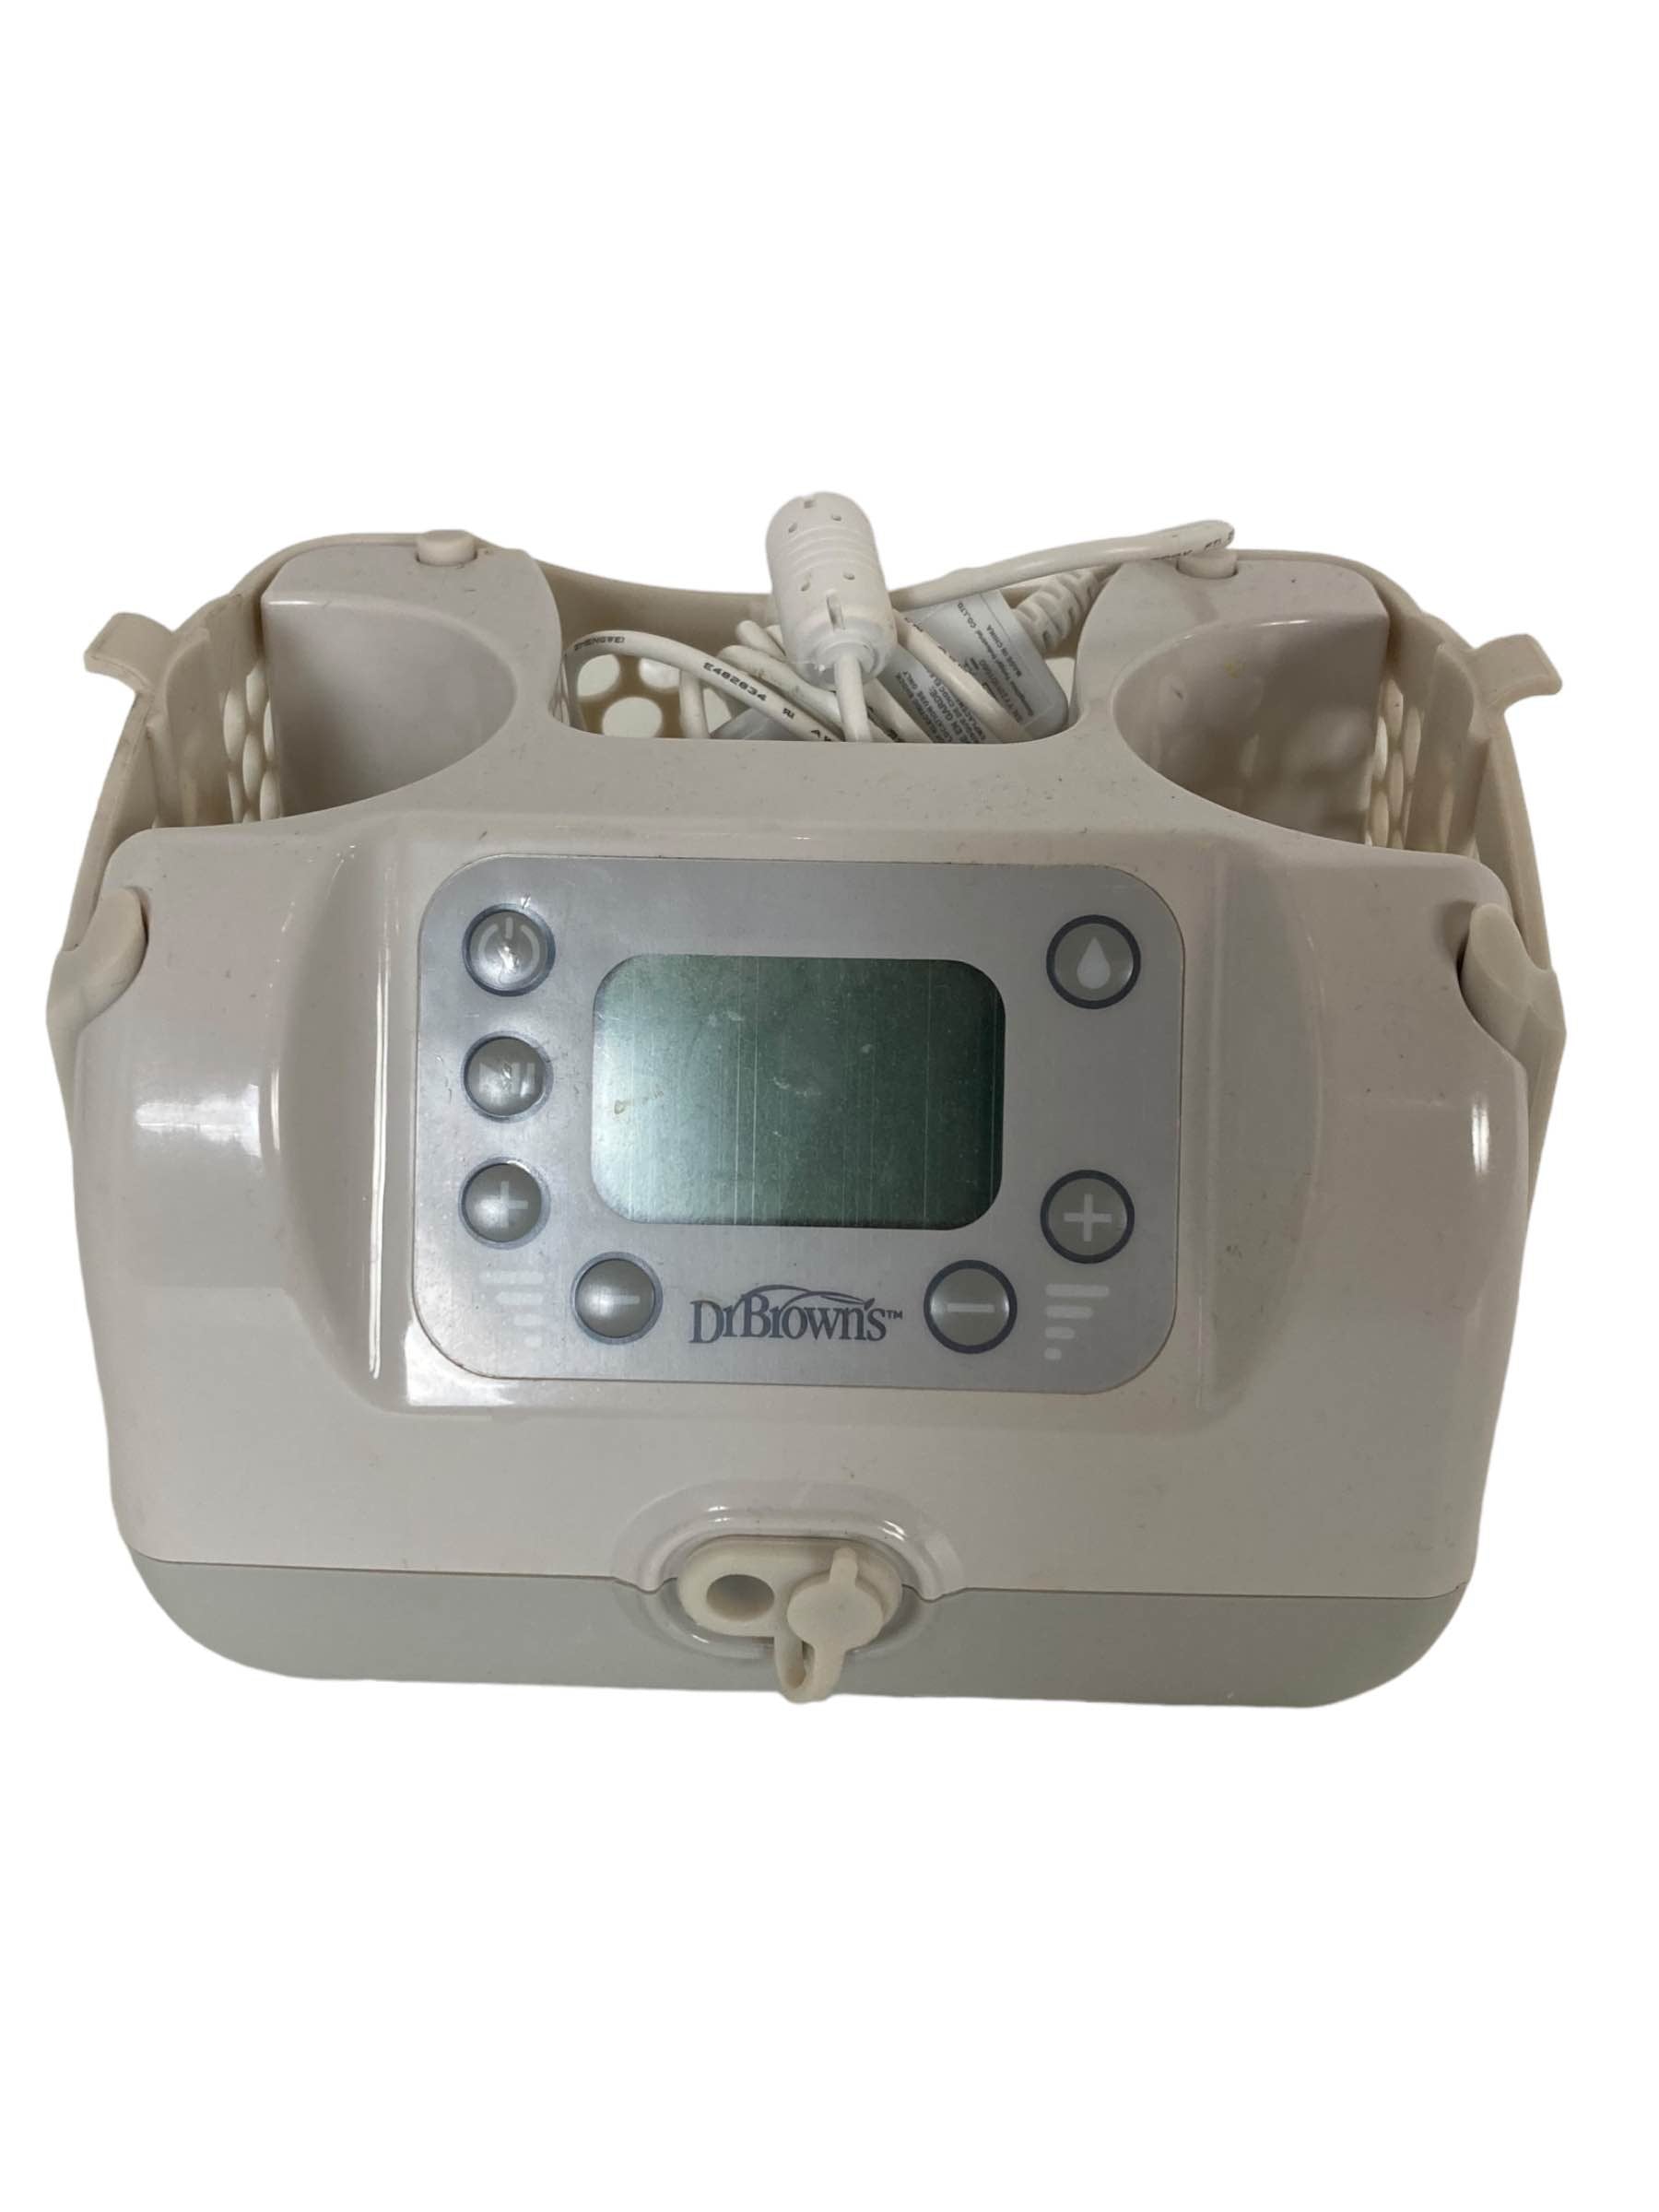 Dr. Browns CustomFlow Double Electric Breast Pump 